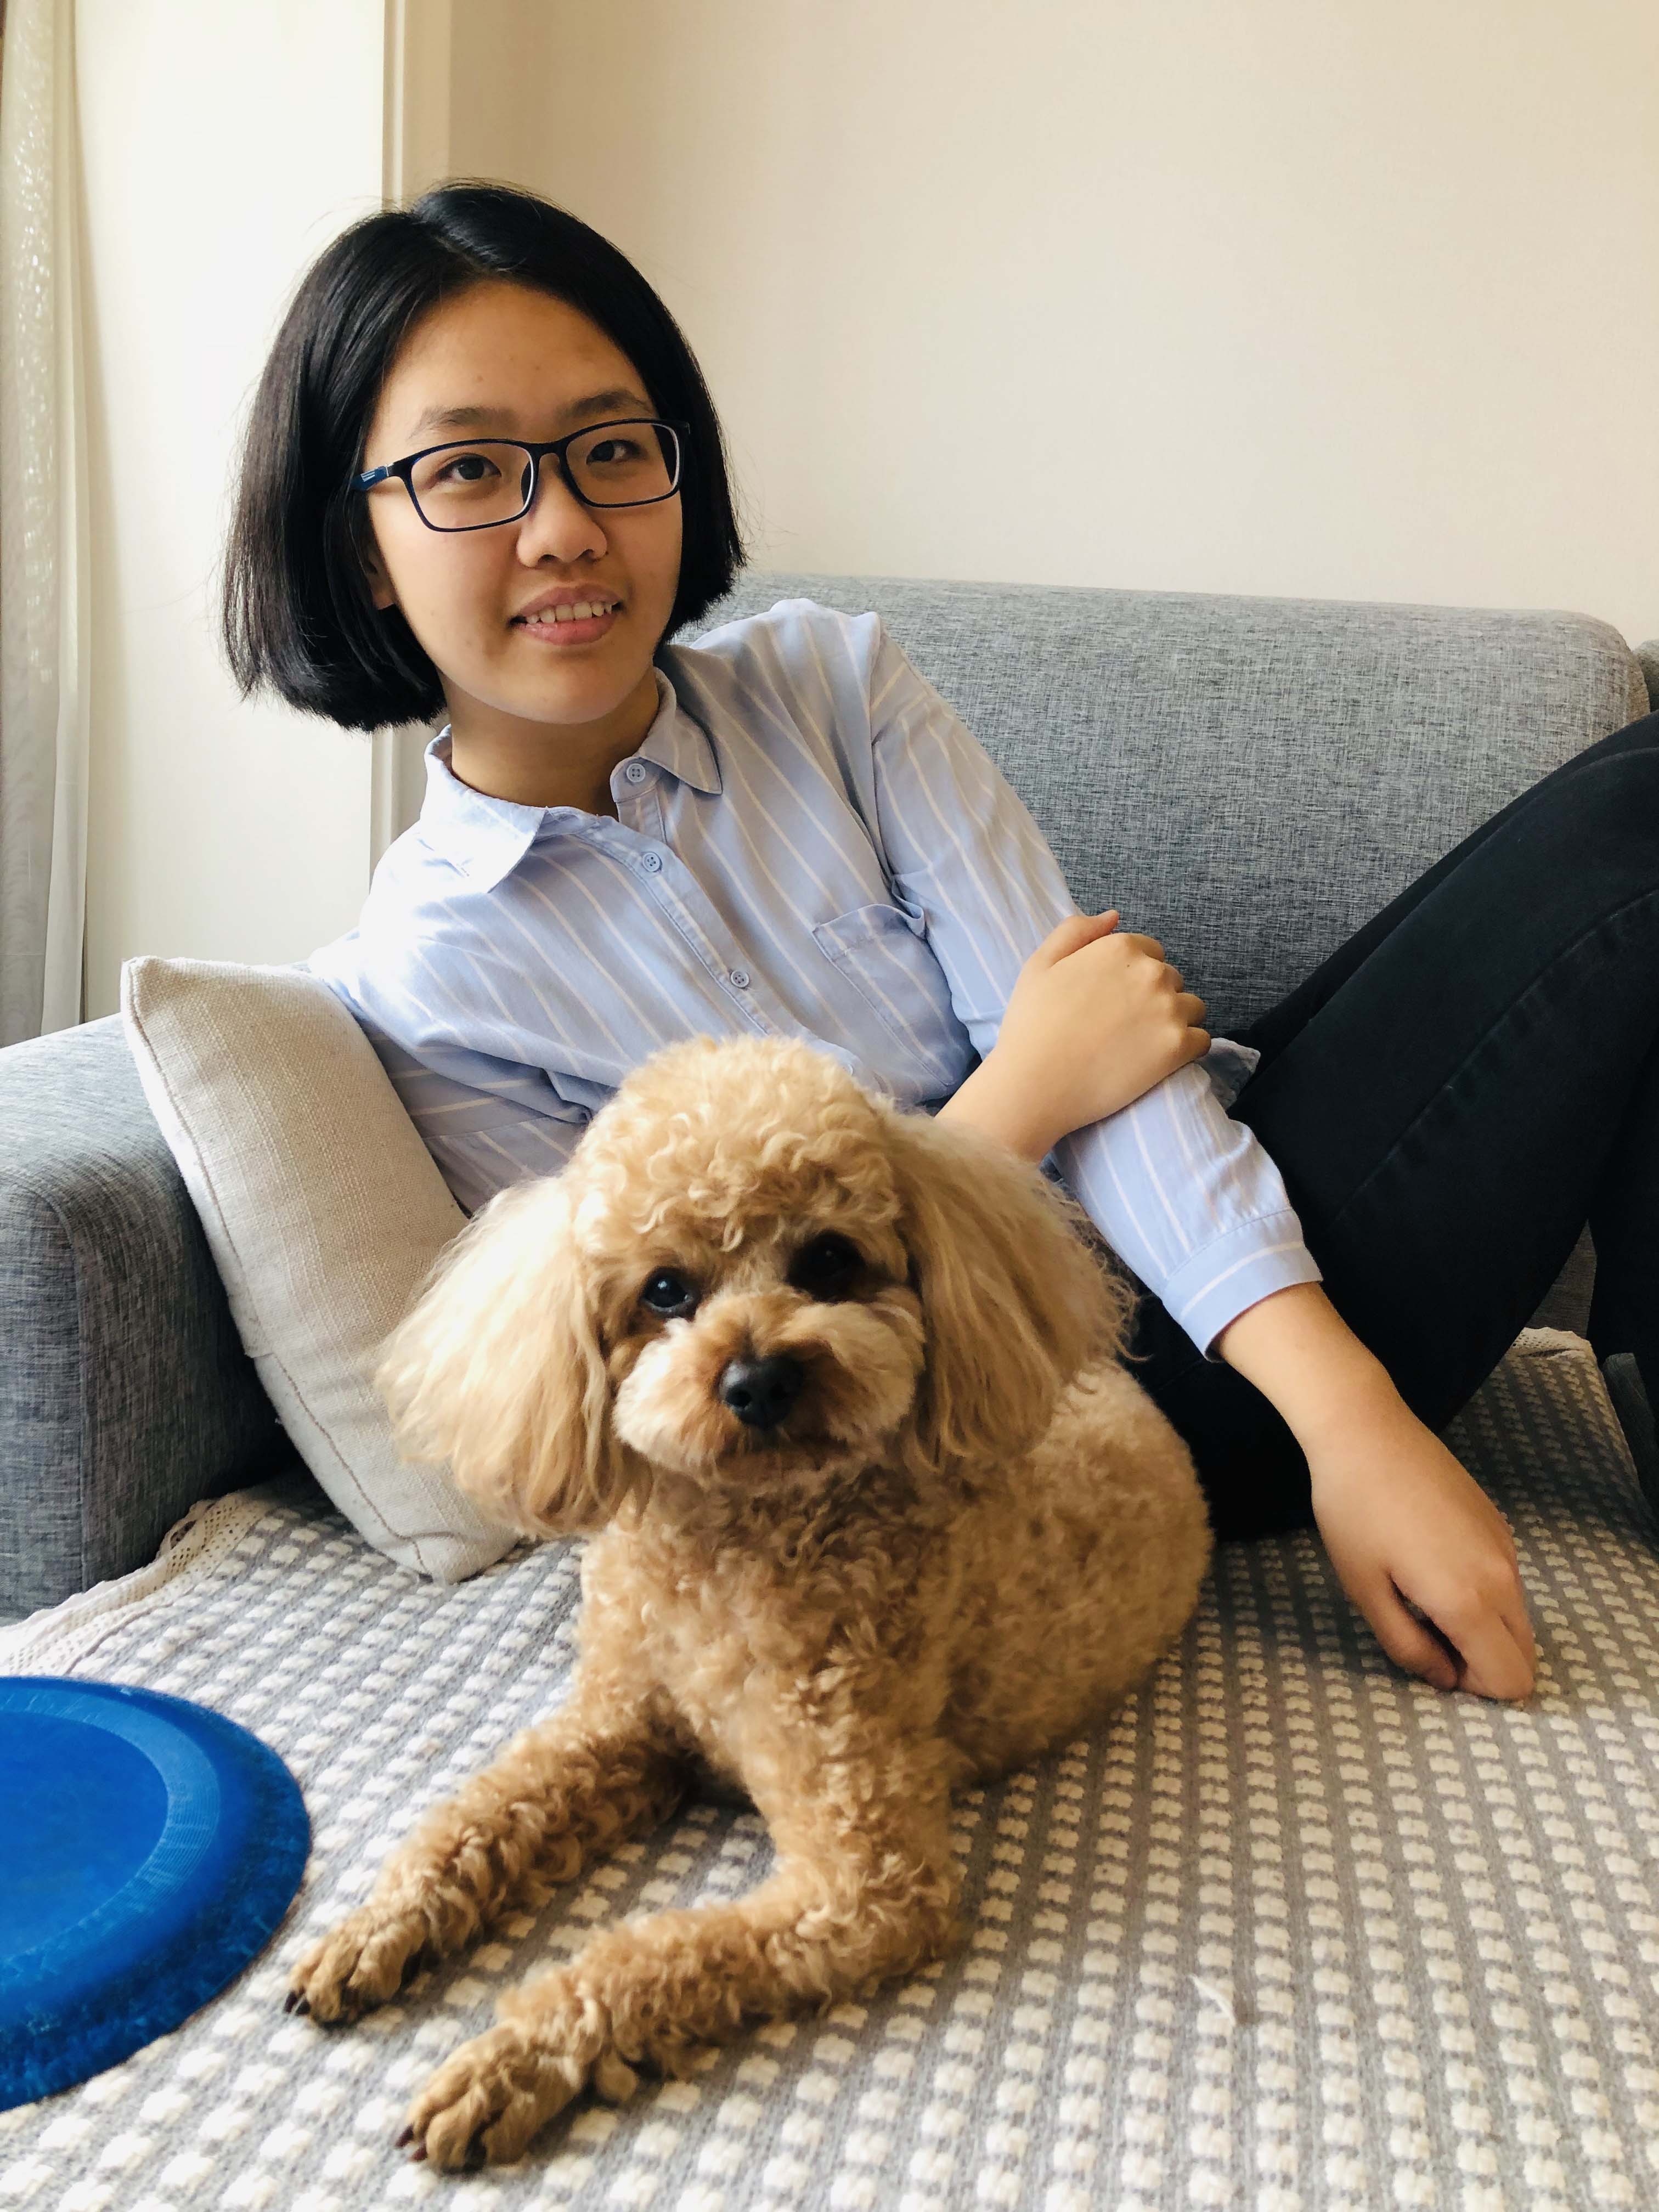 Isabella Han smiling for the camera with her small dog, named Ketchup, who is also facing the camera and smiling.